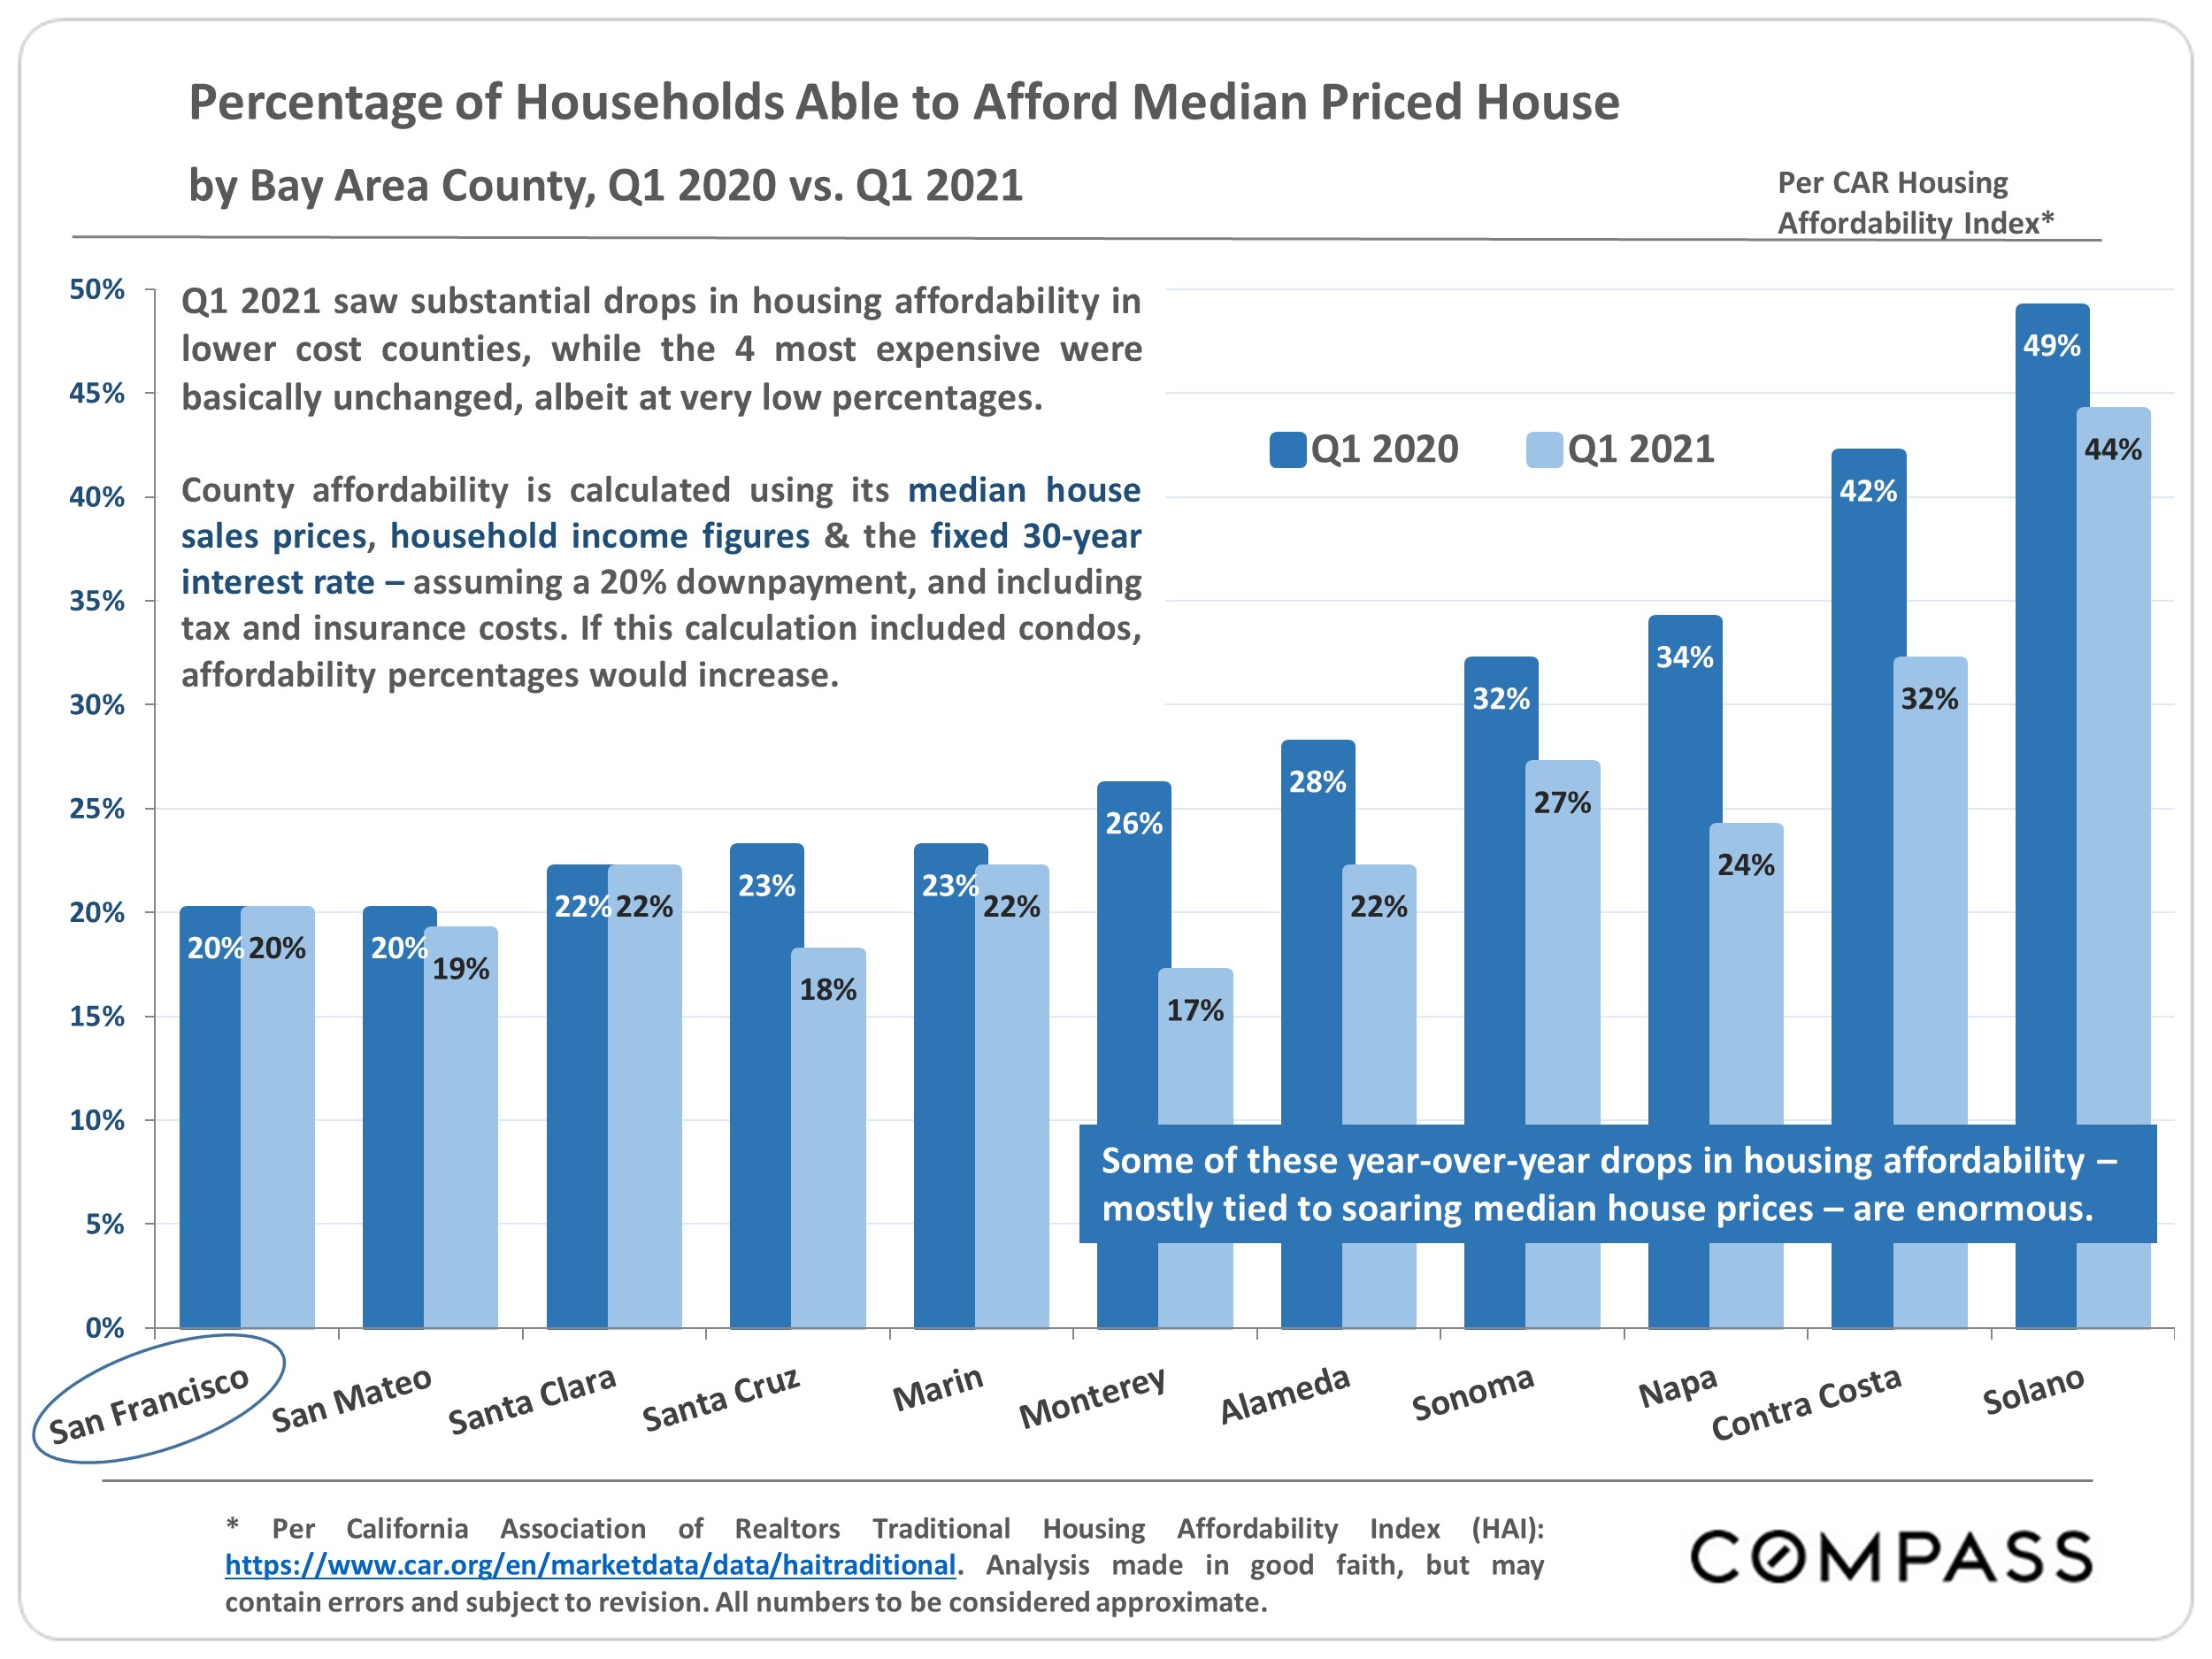 Chart showing the Percentage of Households Able to Afford Median Priced House by Bay Area County, Q1 2020 vs Q1 2021